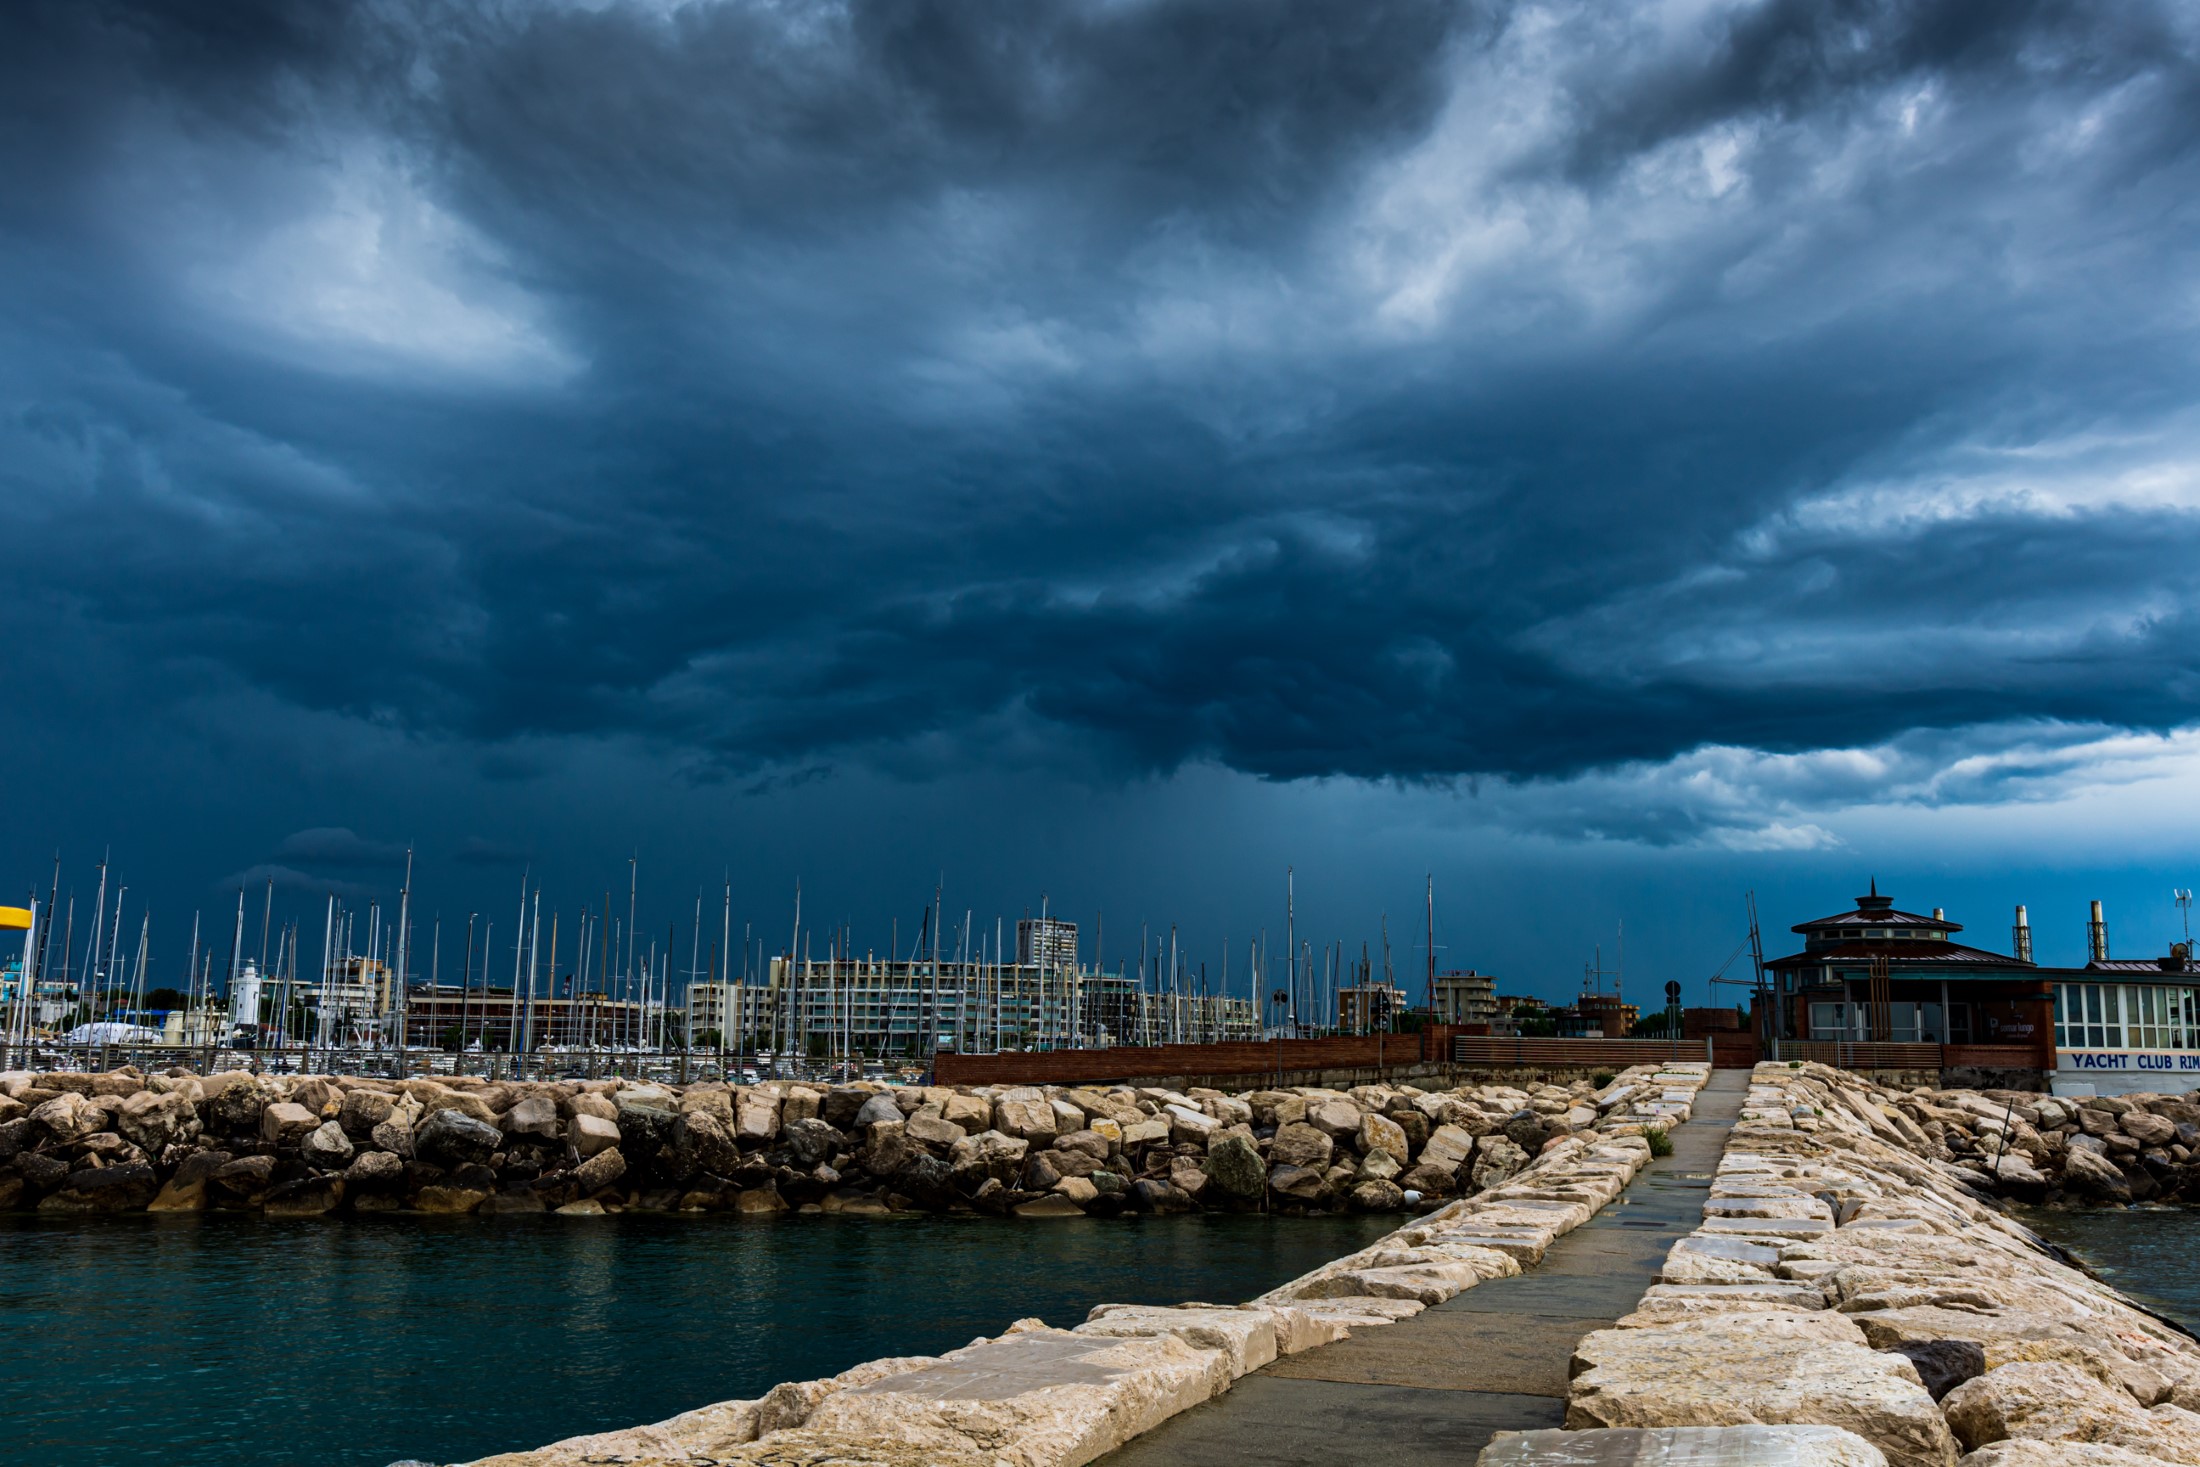 Rimini co robić w trakcie deszczu, View of the thunderstorm, which moves over the mountains behind the city of Rimini!